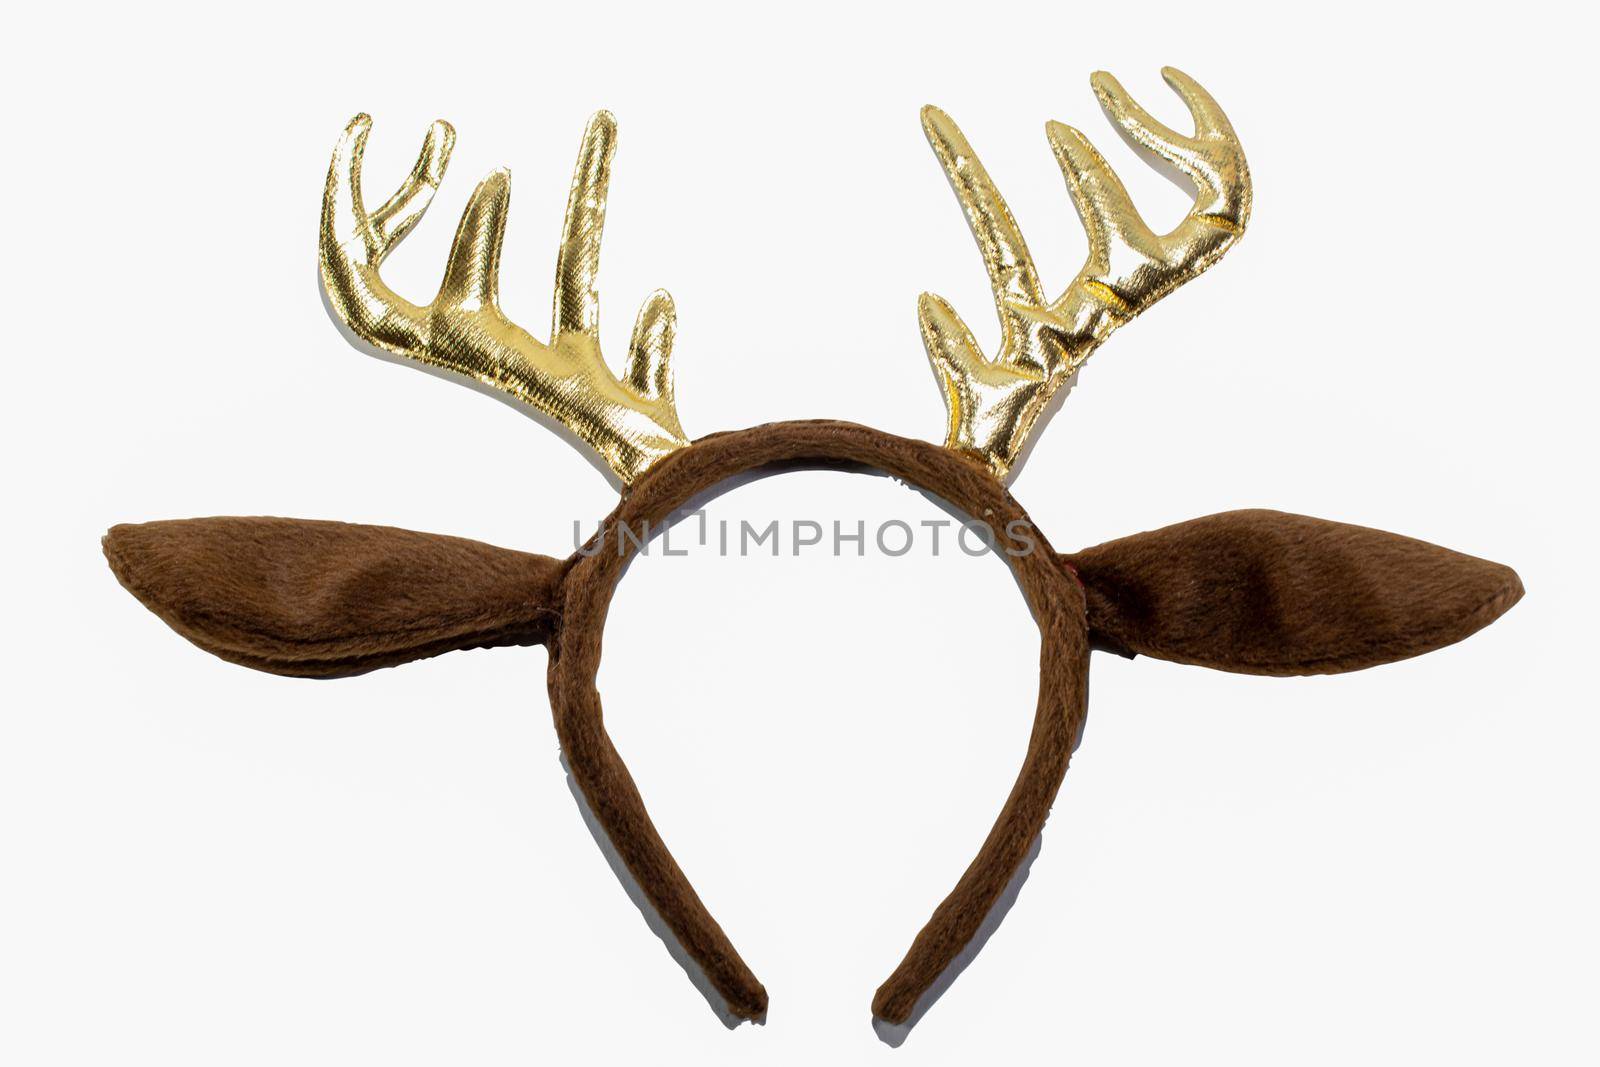 Reindeer horns on a white background by bybyphotography